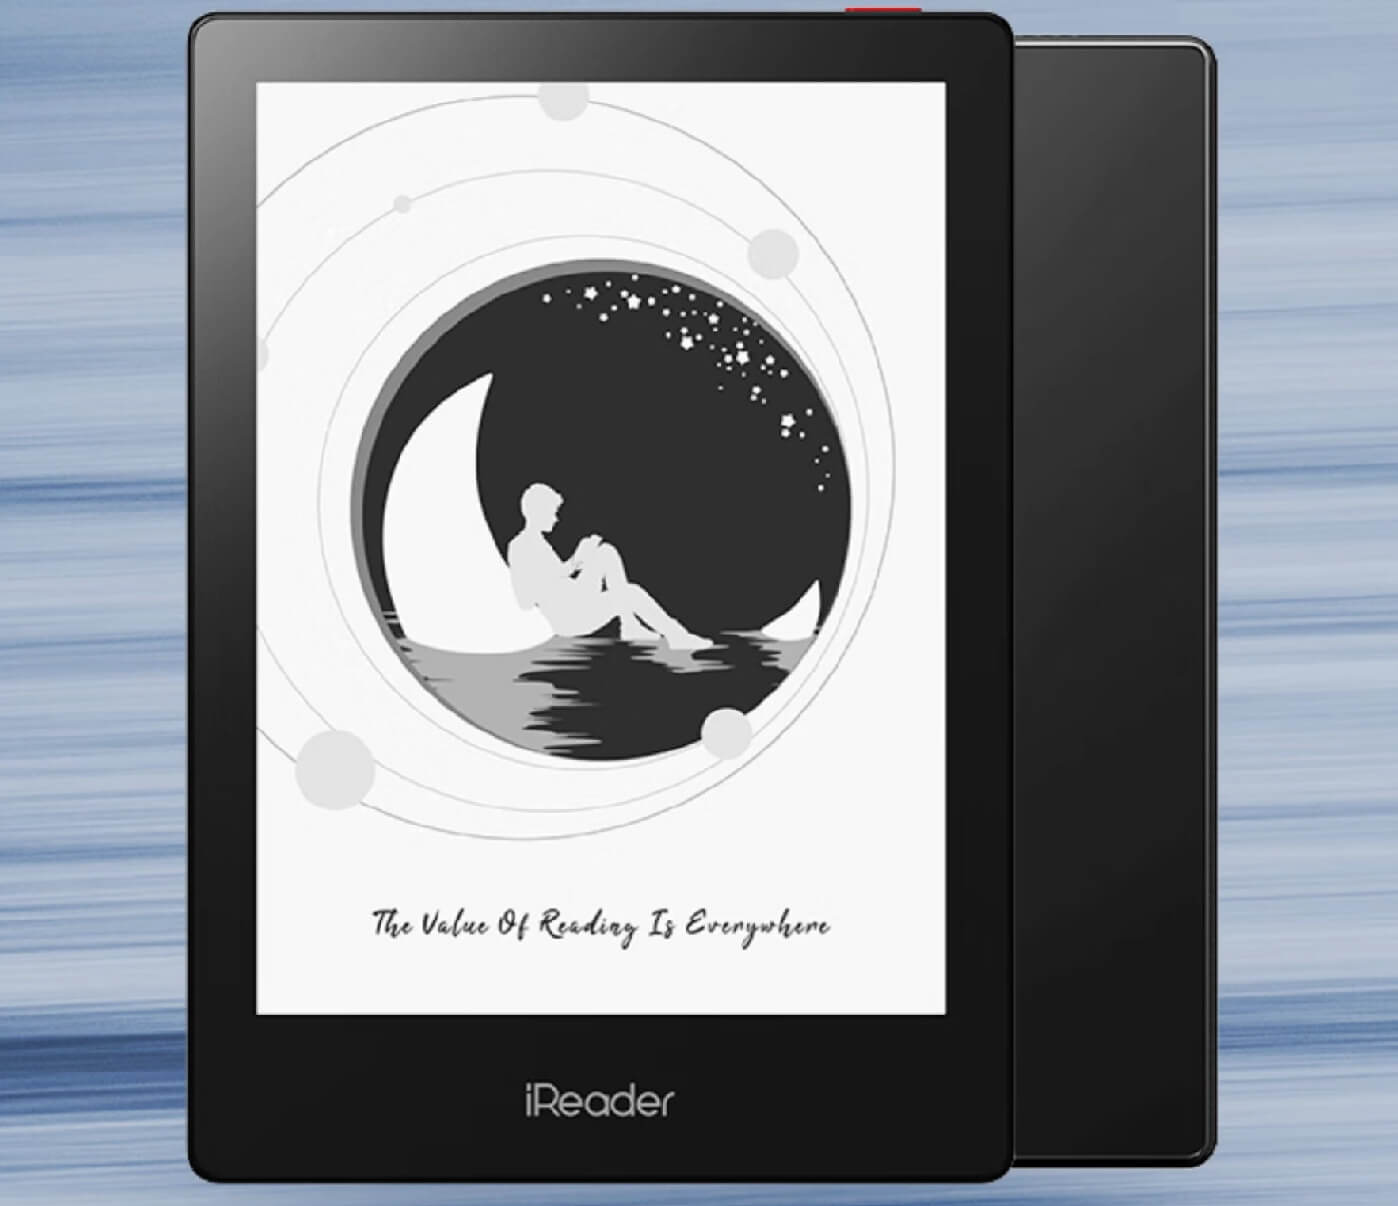 New iReader Neo and Neo Pro e-readers with 6-inch E Ink display ...